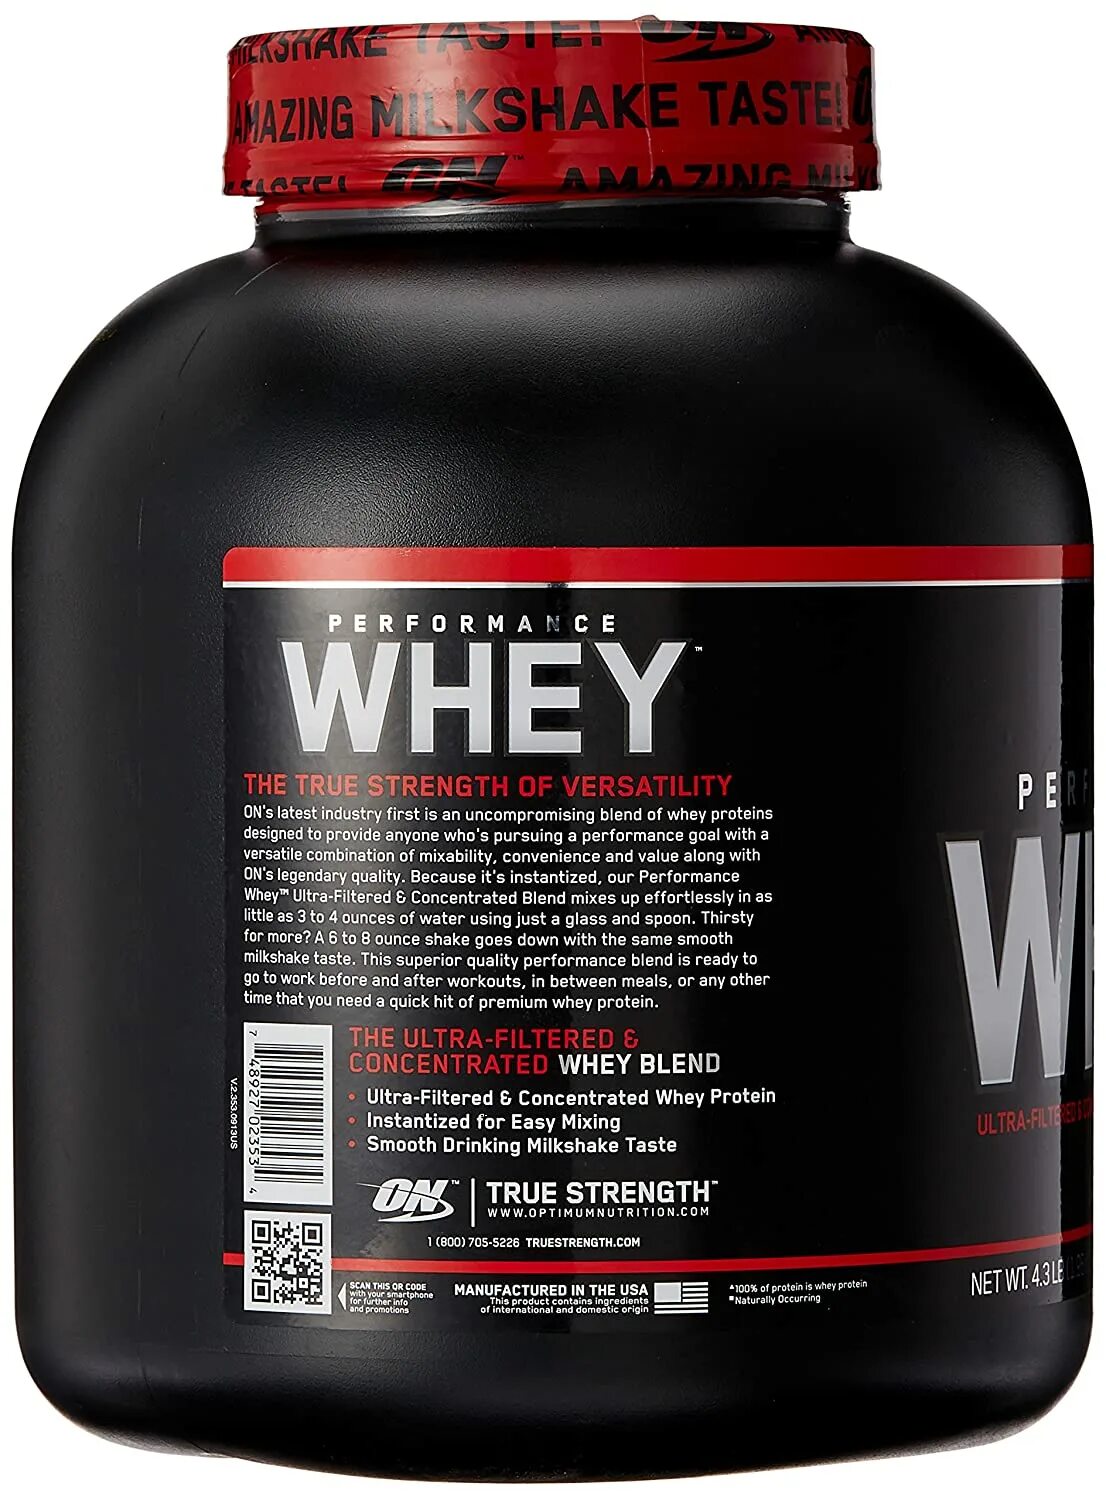 Optimized performance. Протеин Optimum Nutrition Performance Whey. Whey Protein isolate Concentrate российский. Протеин Whey Gold Standard Optimum Nutrition. Optimum Nutrition гидролизат.